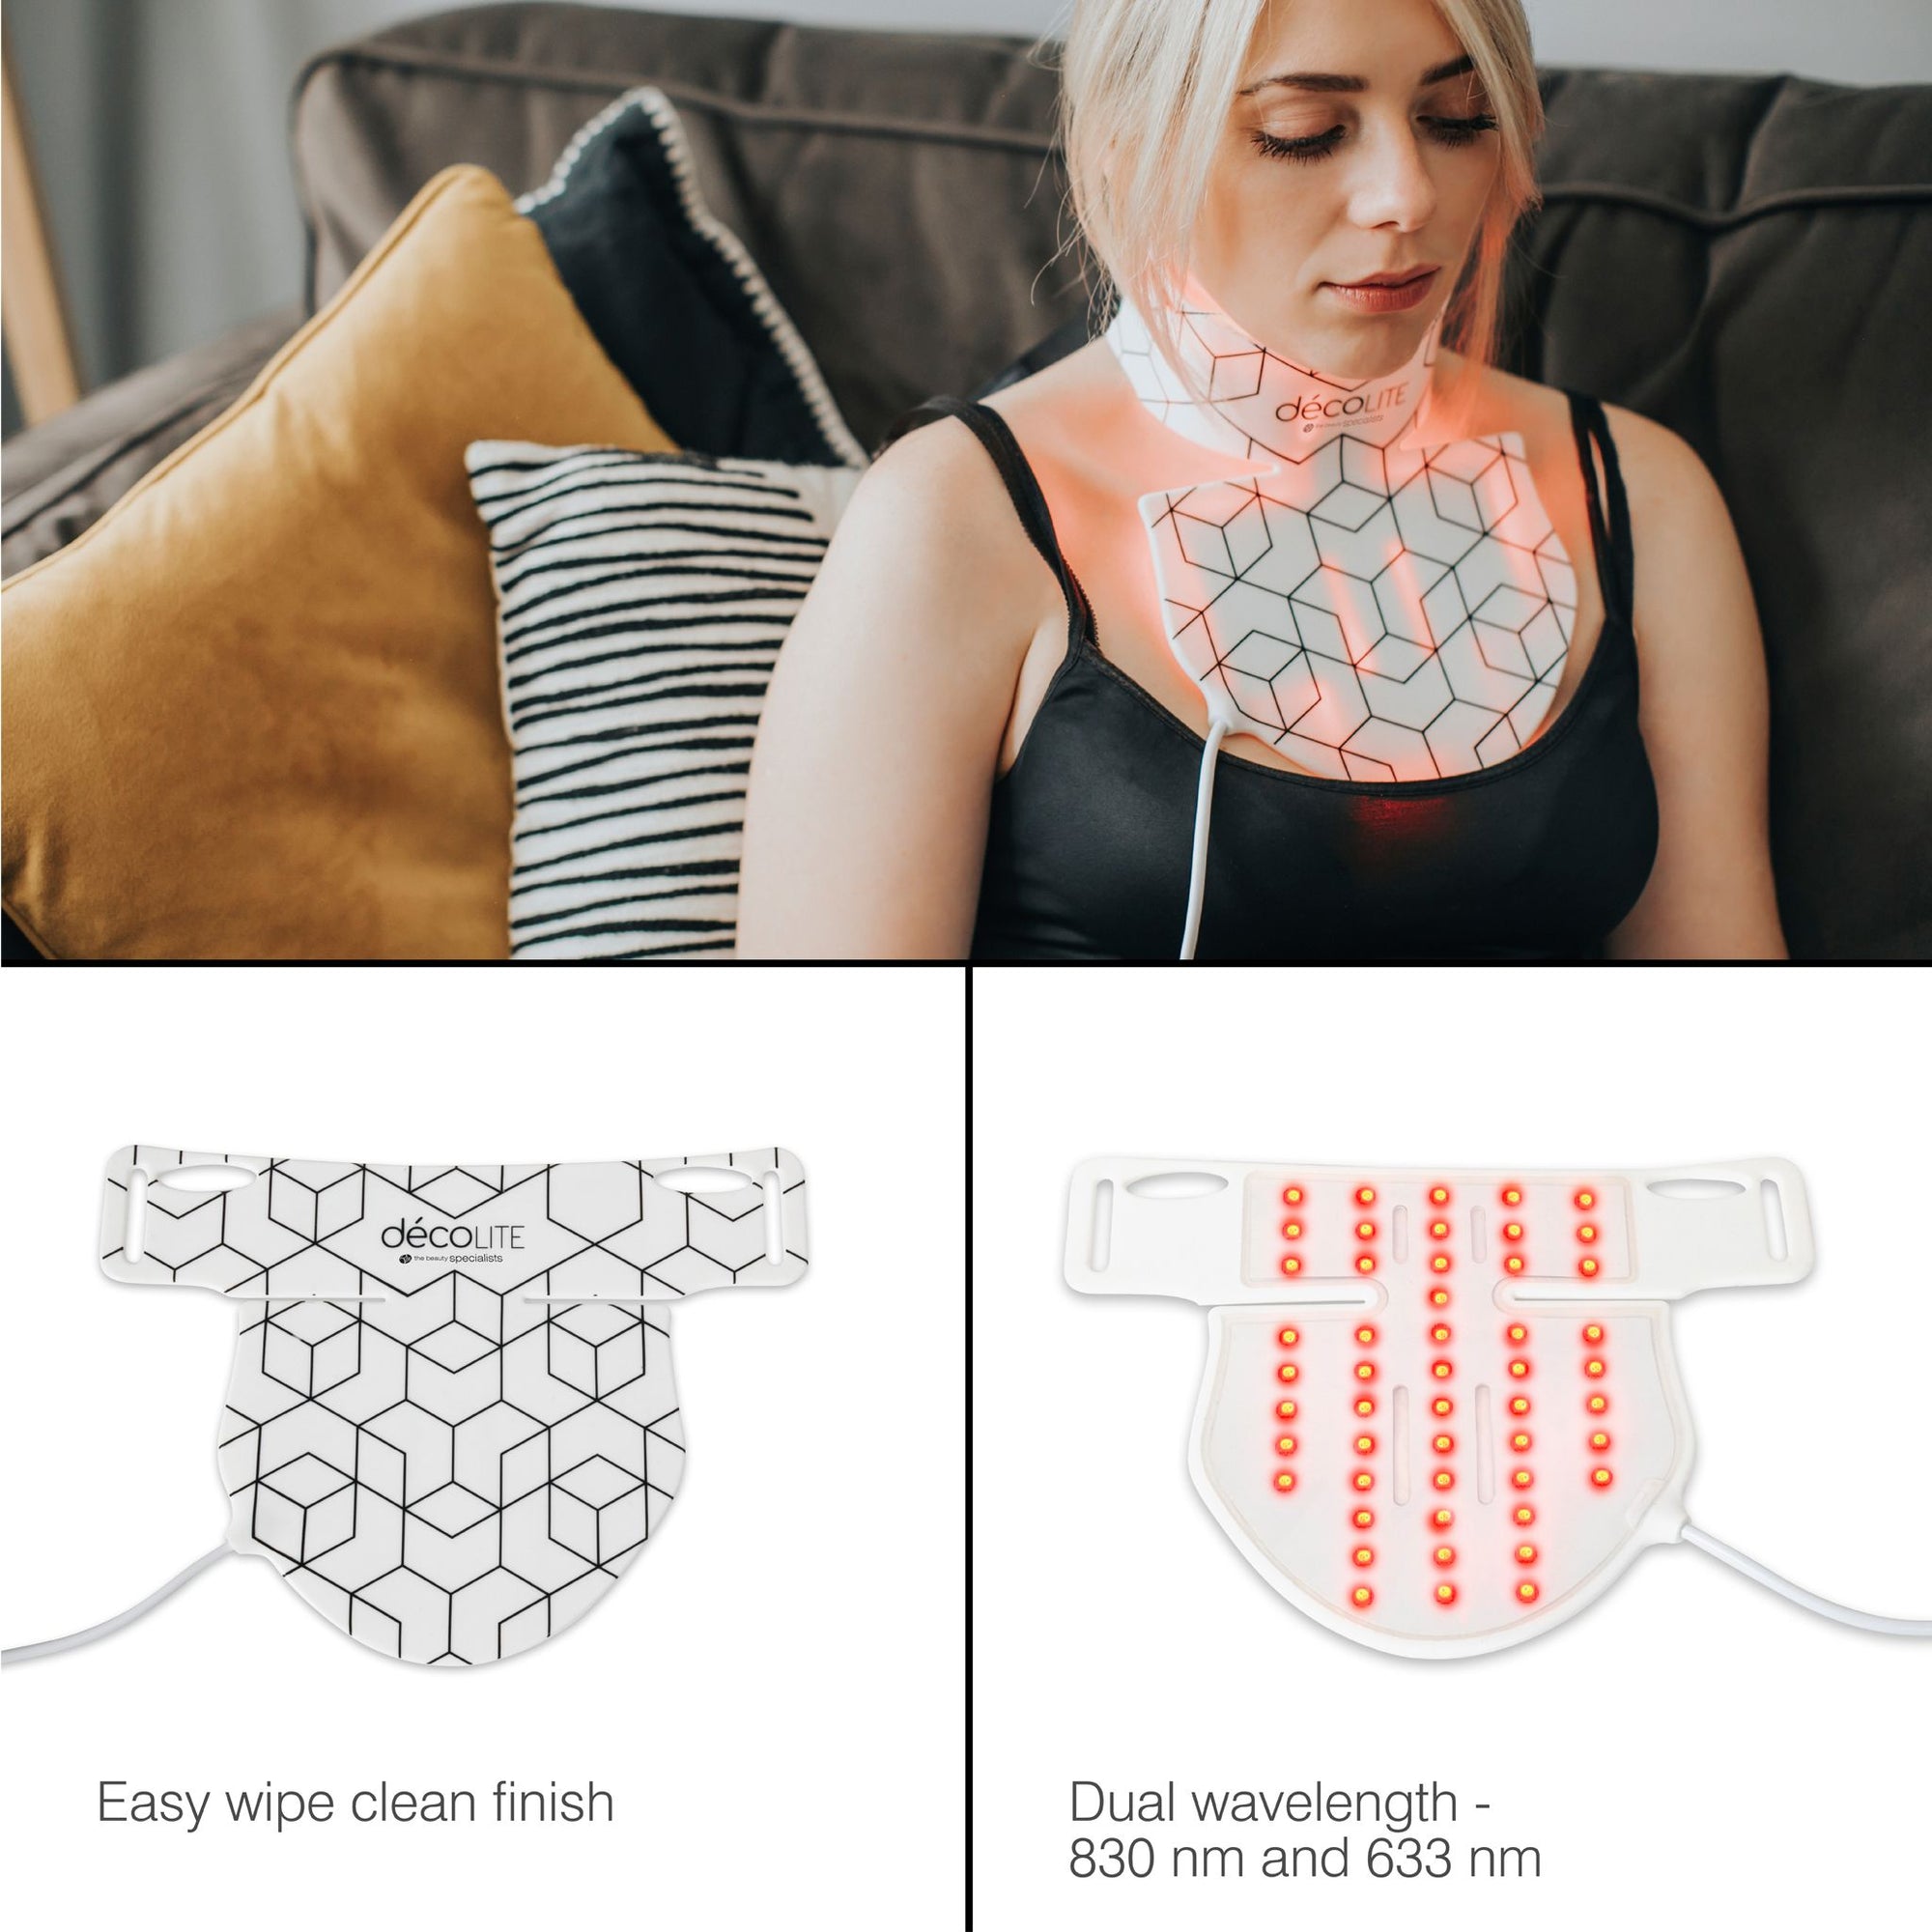 decoLITE LED light treatment soft-fit mask being worn by female sat on sofa reading. 2 smaller inset images showing the front and rear of the treatment mask stating 'easy wipe clean finish' and the 'dual wavelength - 830 nm and 633 nm'.